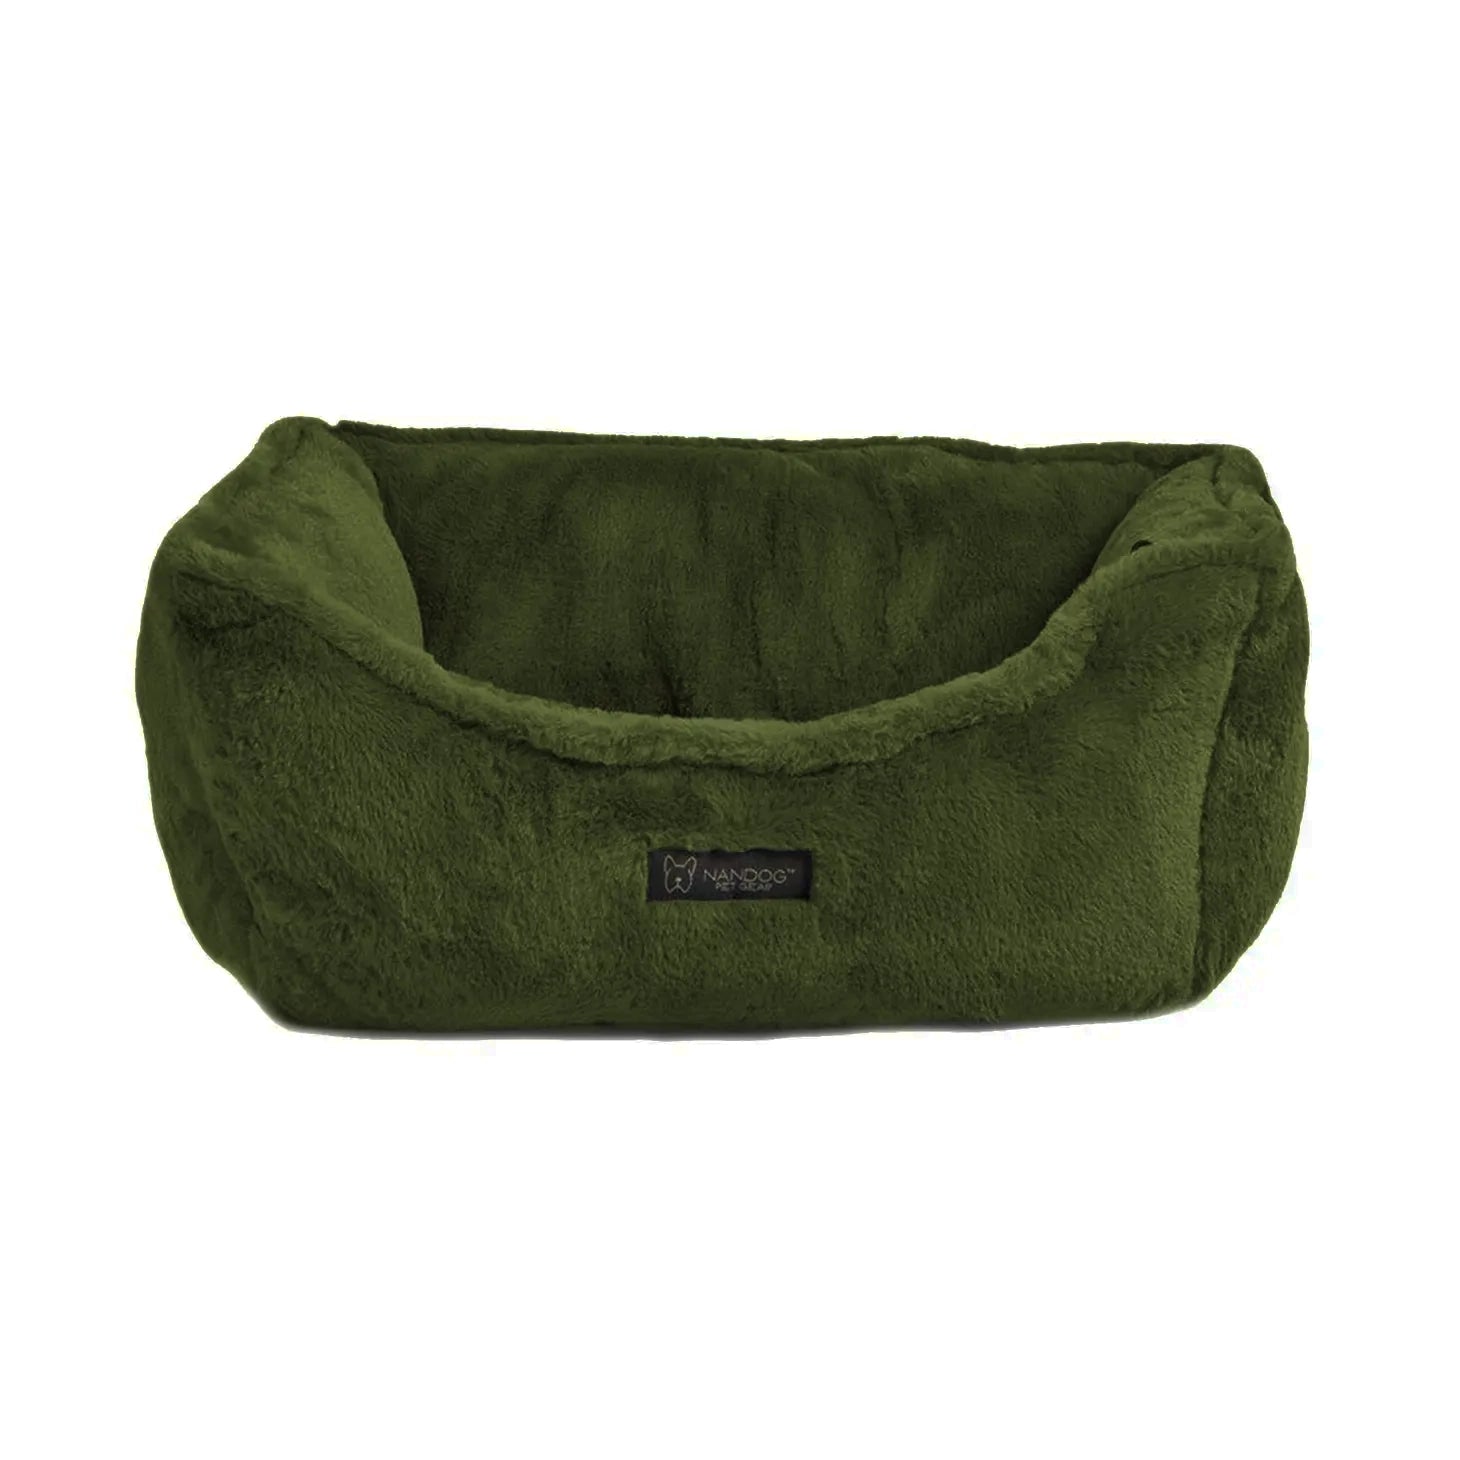 Cloud Reversible Bed - Olive Green